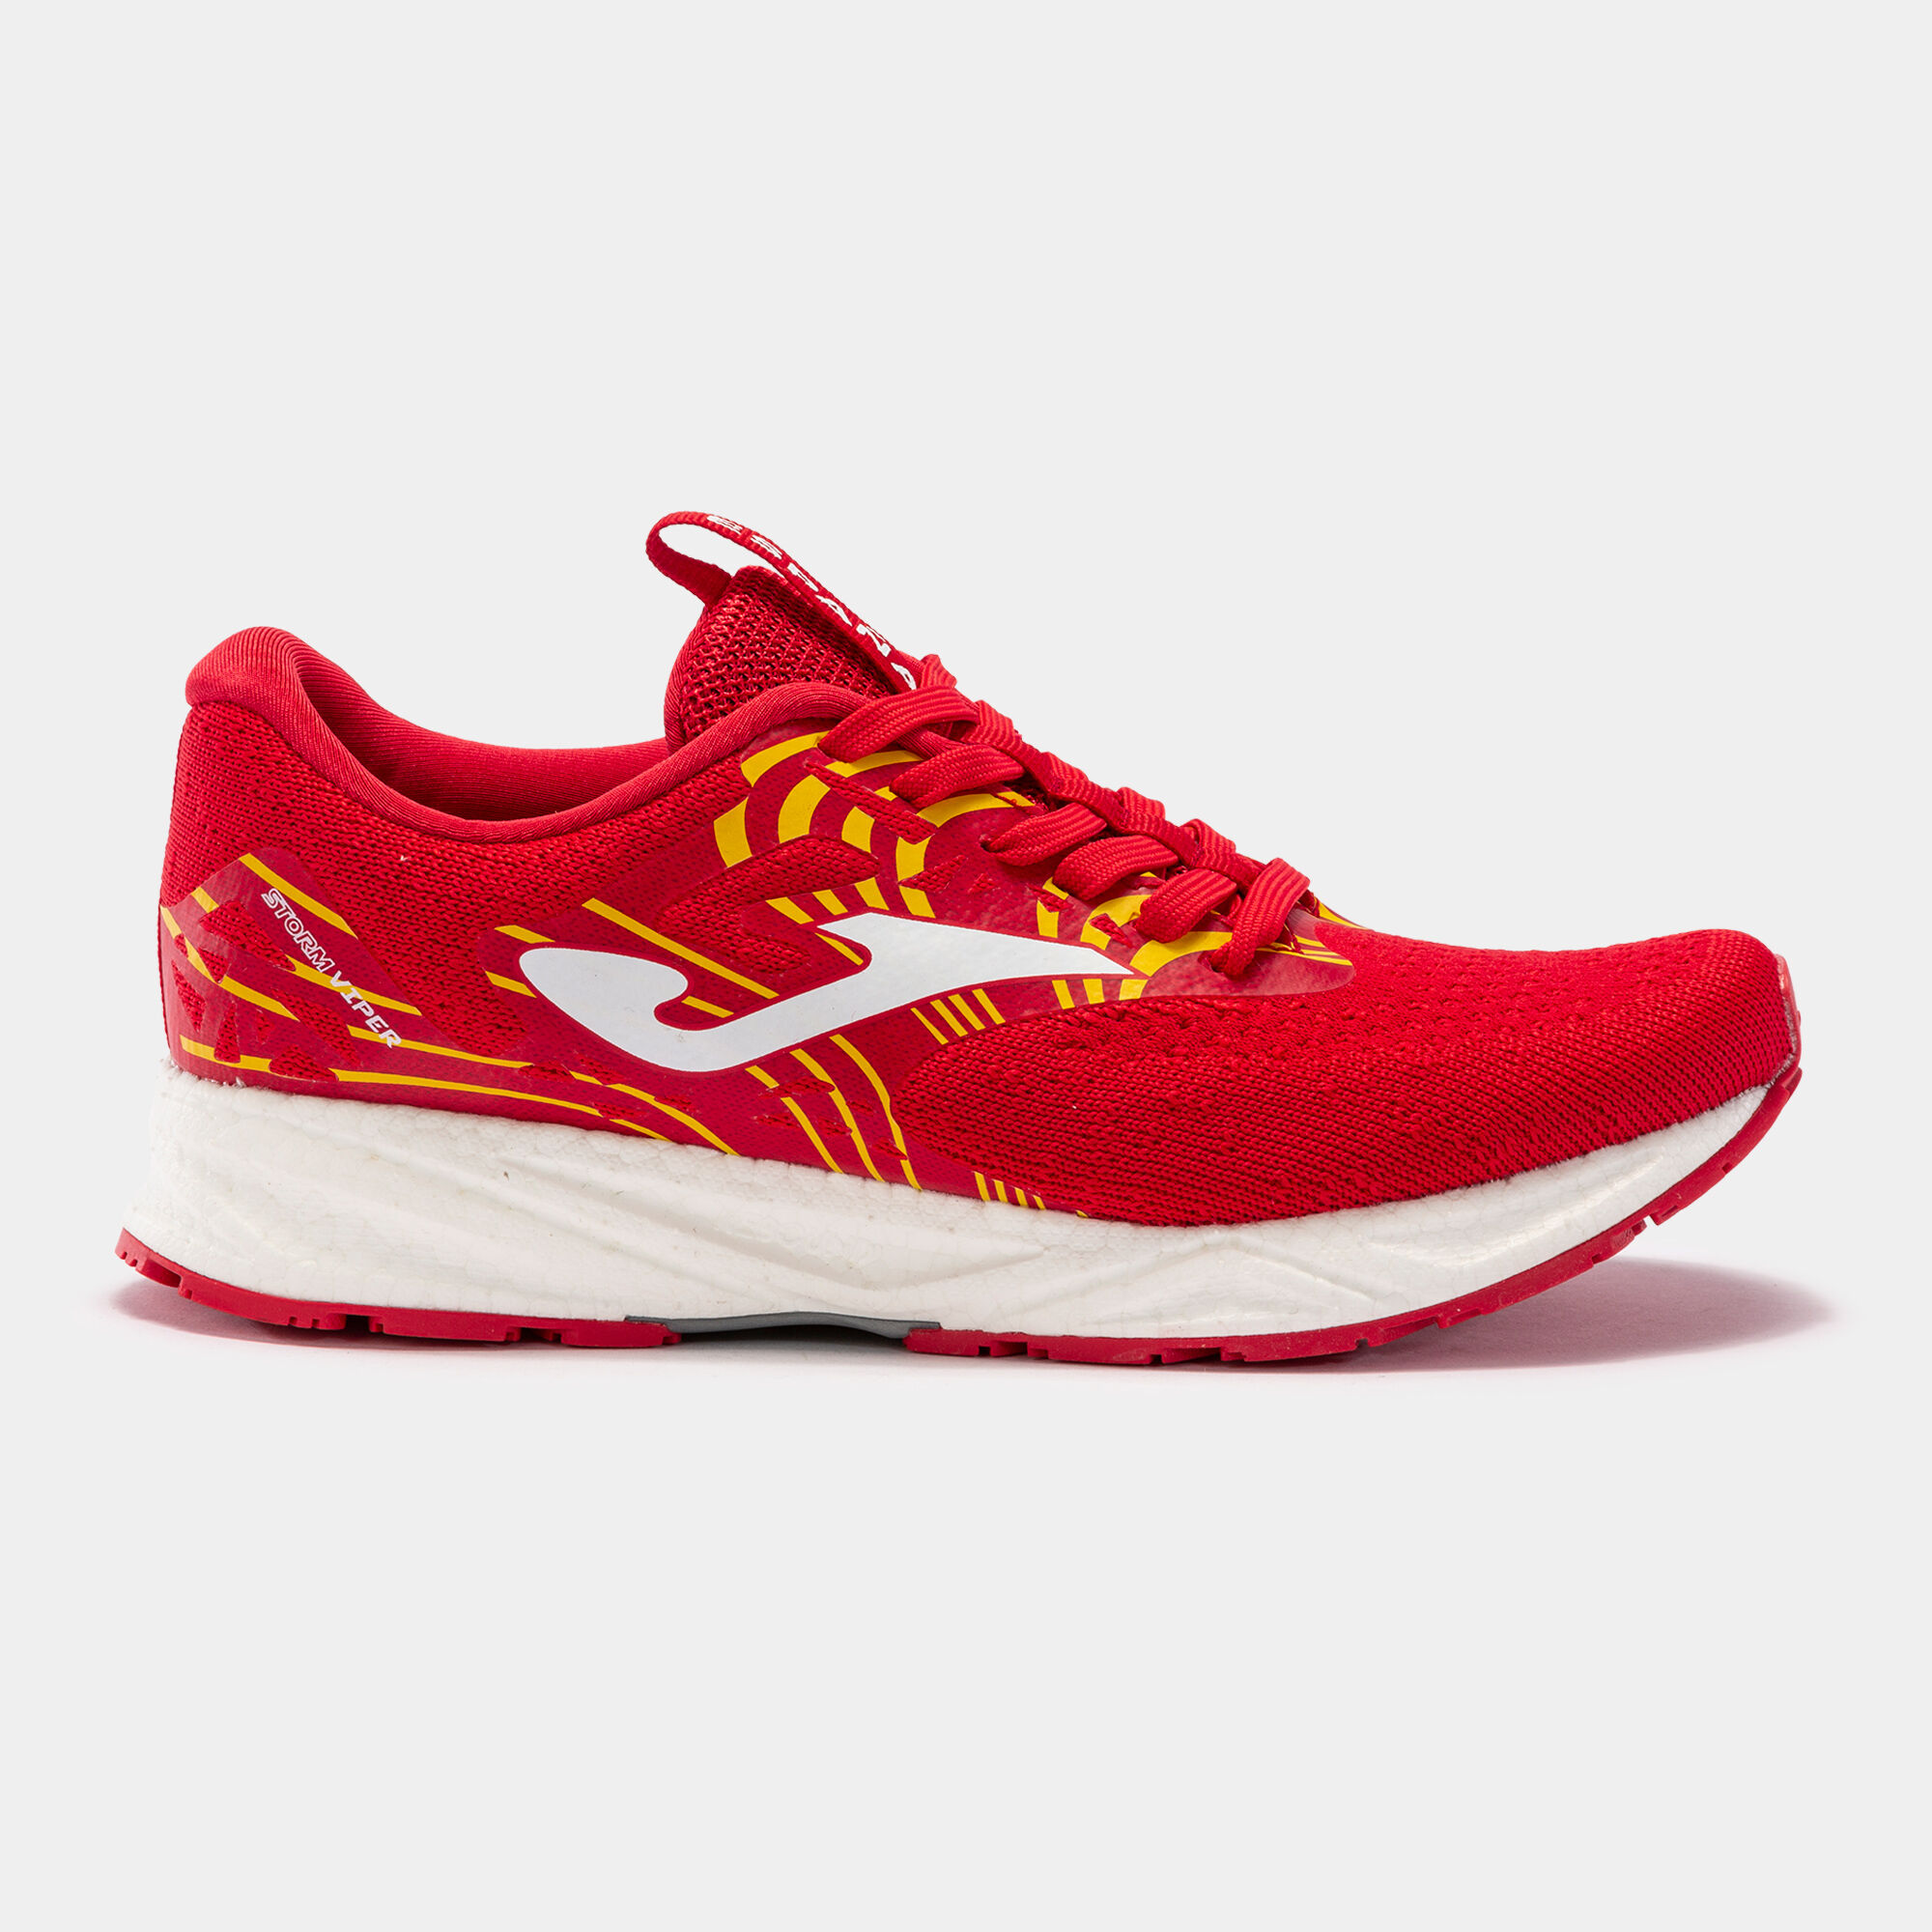 CHAUSSURES RUNNING R.VIPER LADY 22 ESPAGNE FEMME ROUGE